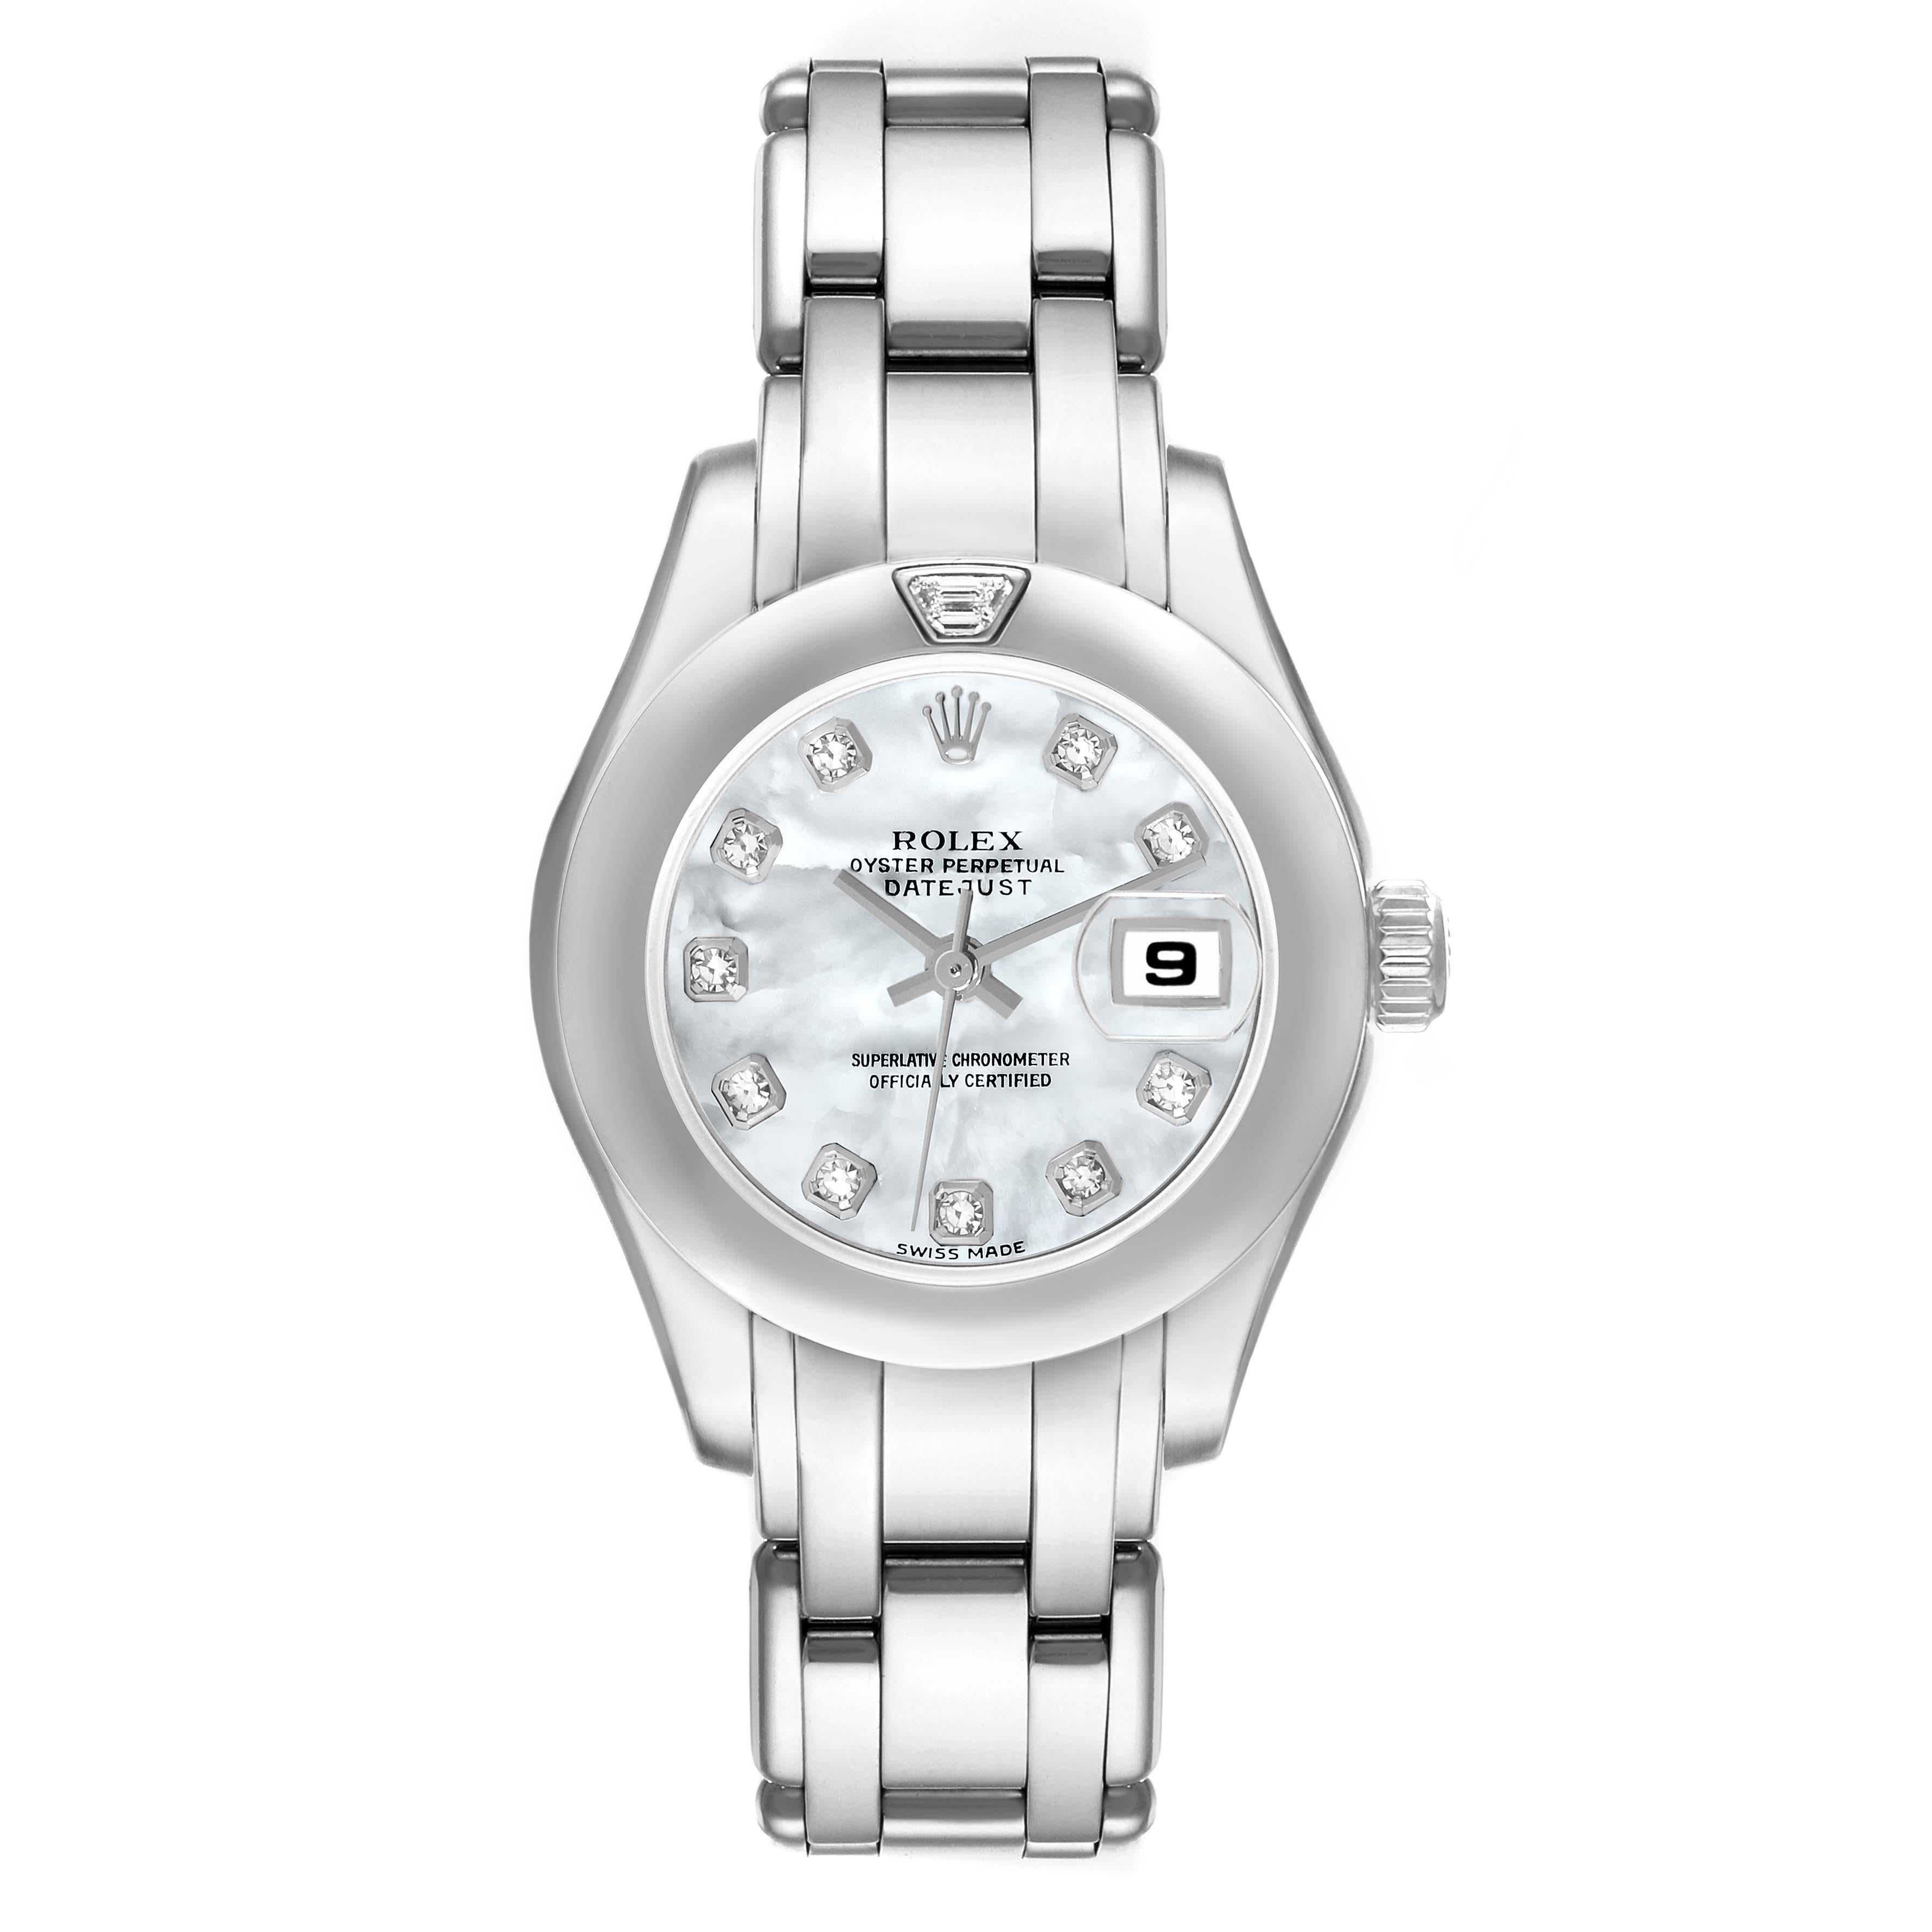 Rolex Pearlmaster White Gold MOP Diamond Dial Ladies Watch 69329. Officially certified chronometer self-winding movement. 18k white gold oyster case 29.0 mm in diameter. Rolex logo on a crown. 18k white gold smooth domed bezel with original Rolex